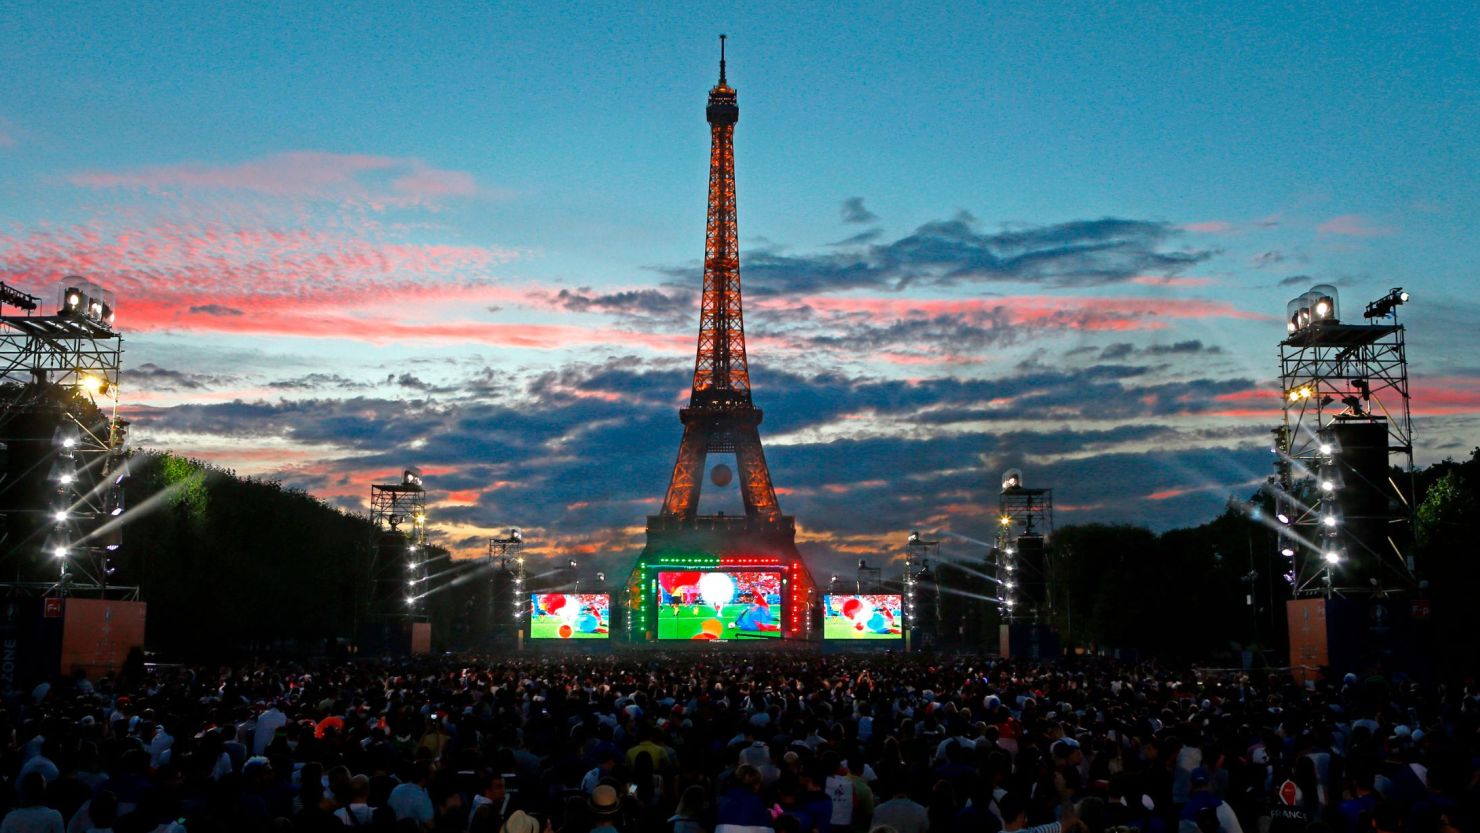 Paris is building up to hosting the 2024 Olympics.